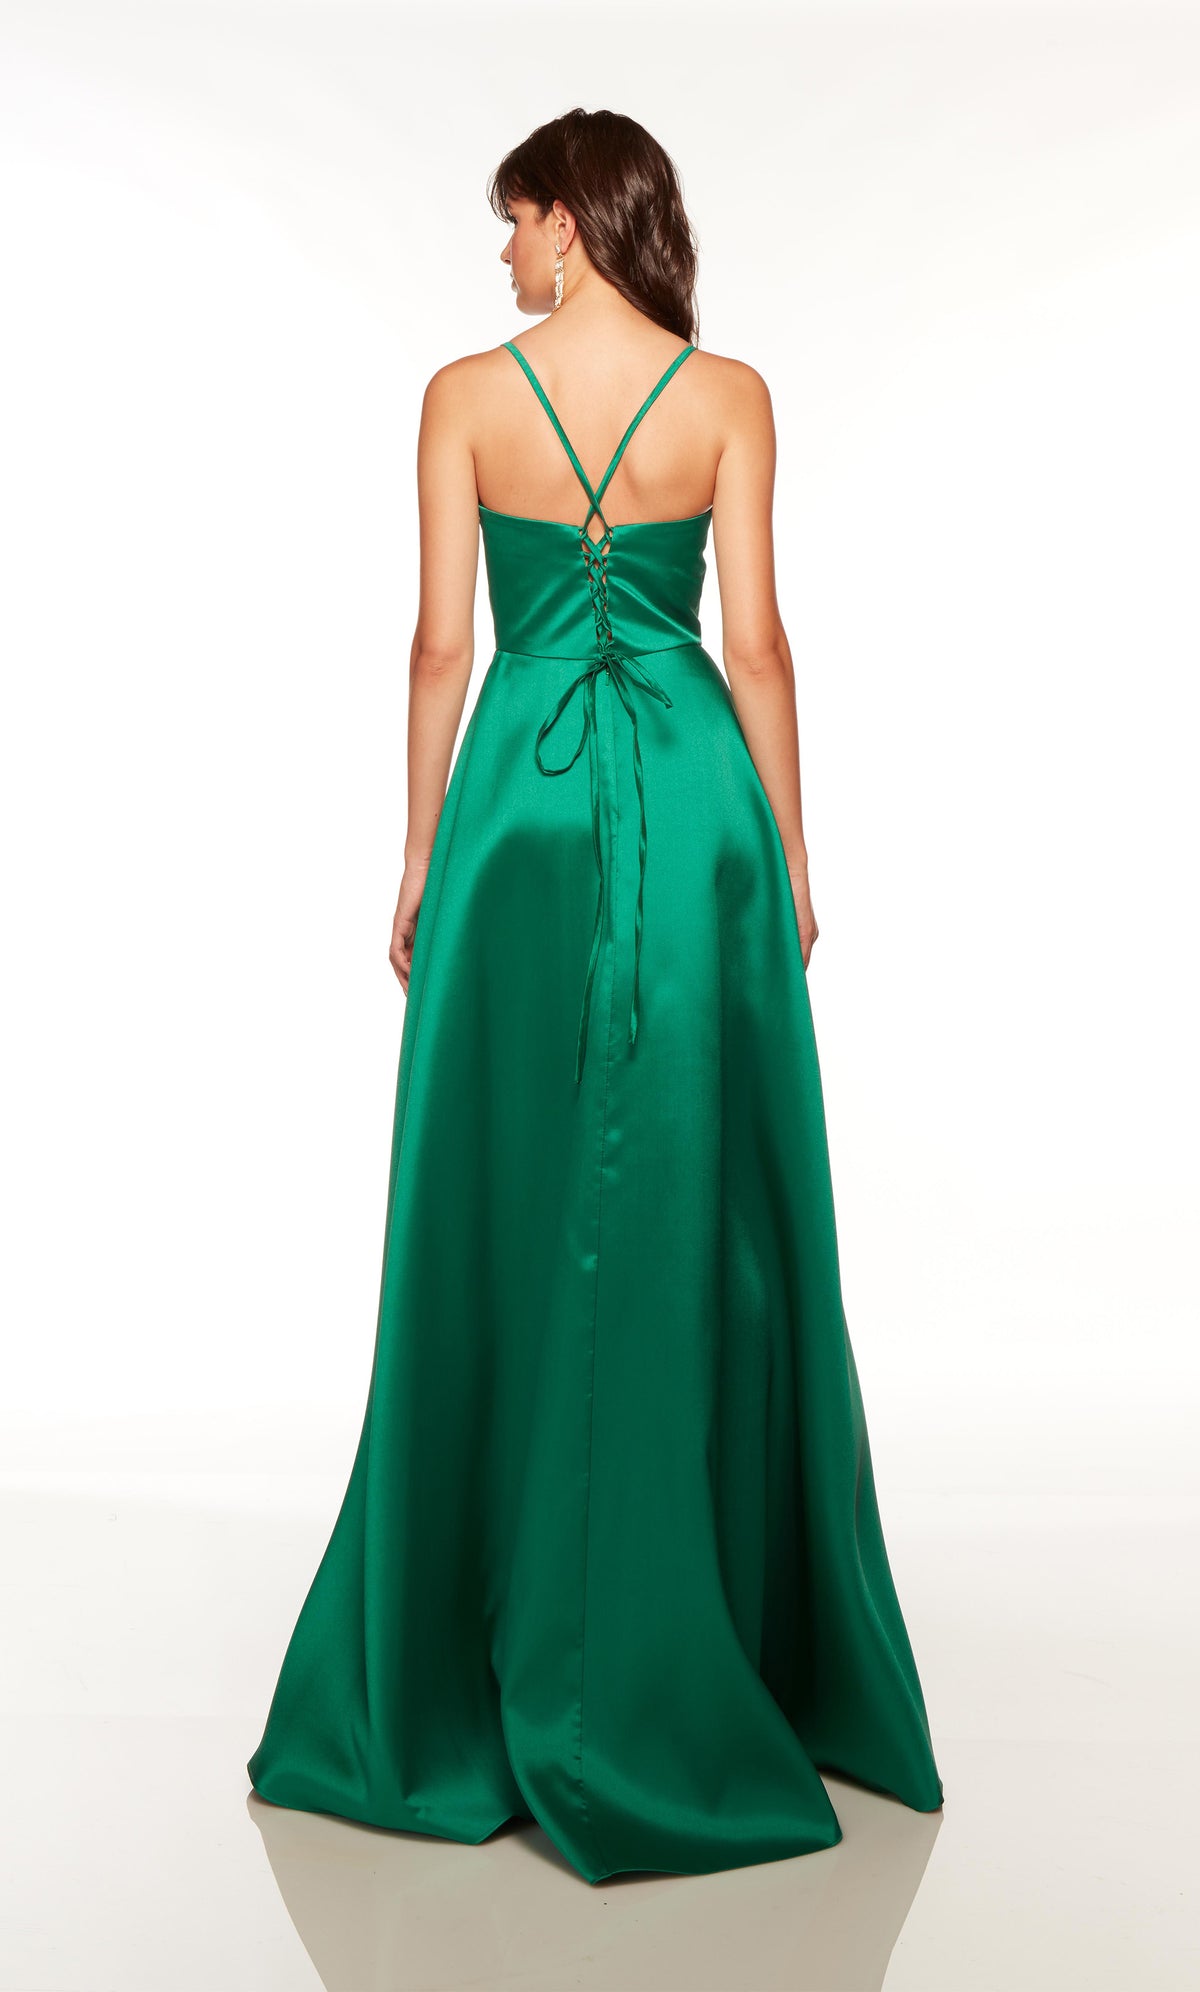 Green prom dress with a lace-up back style and slight train.